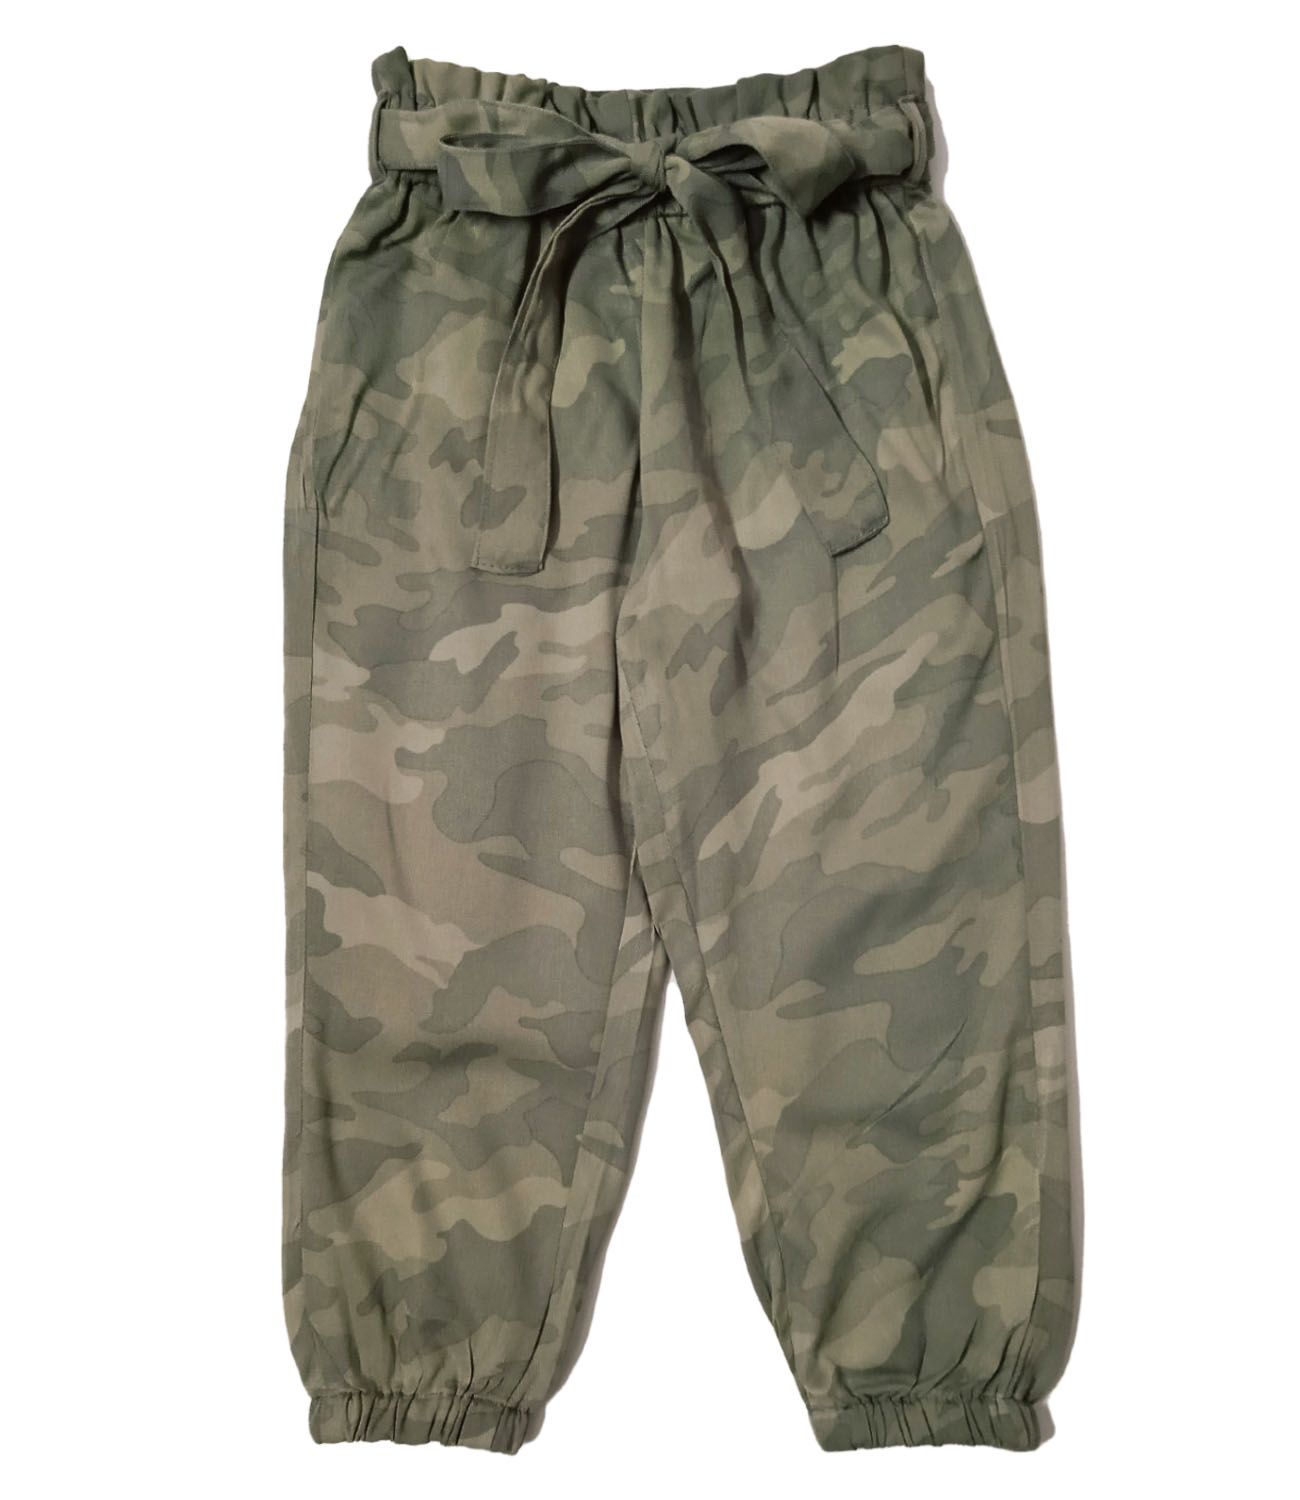 Jogger Style Pant With Camouflaged Print - Green